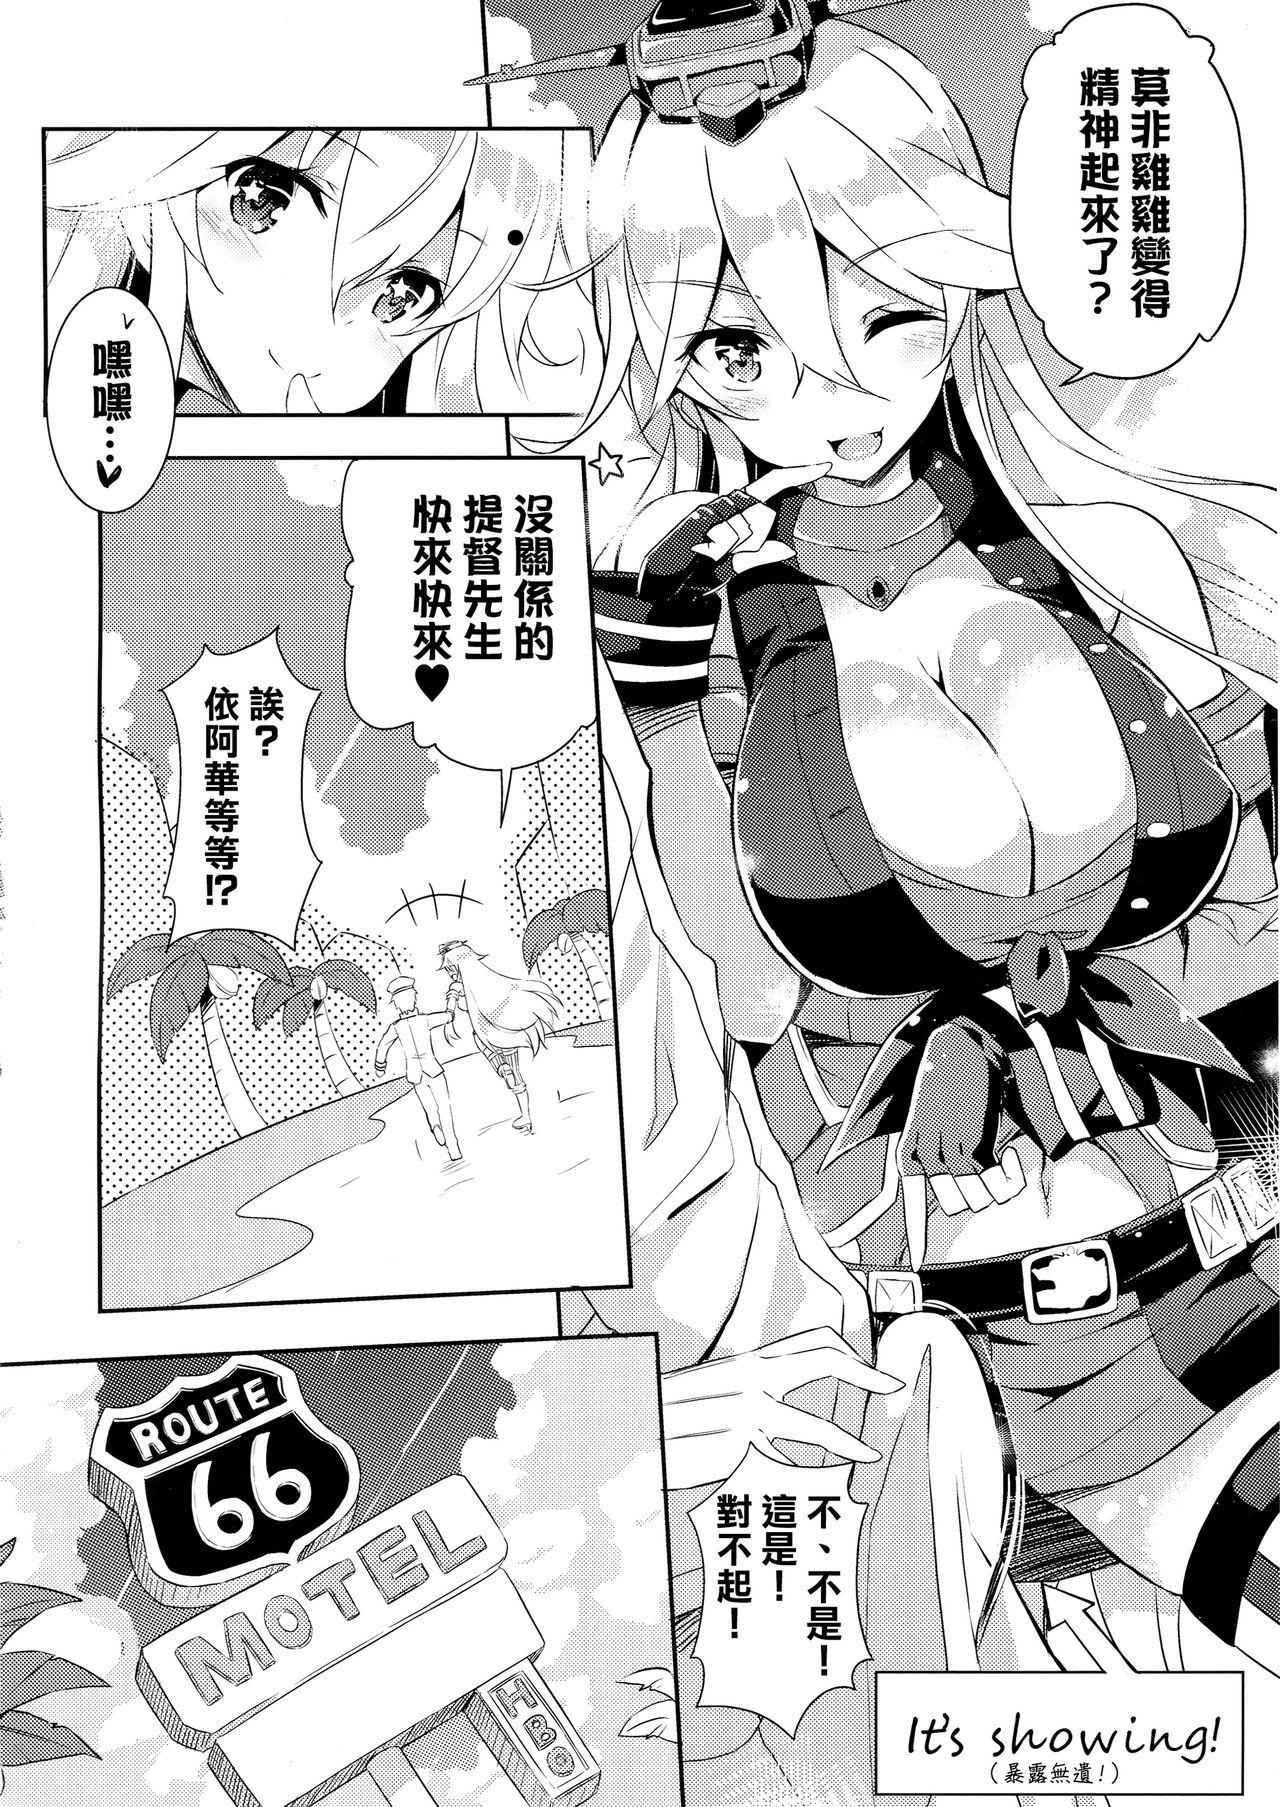 Hunk CUTE GIRL! THE AMERICAN! - Kantai collection Naughty - Page 8